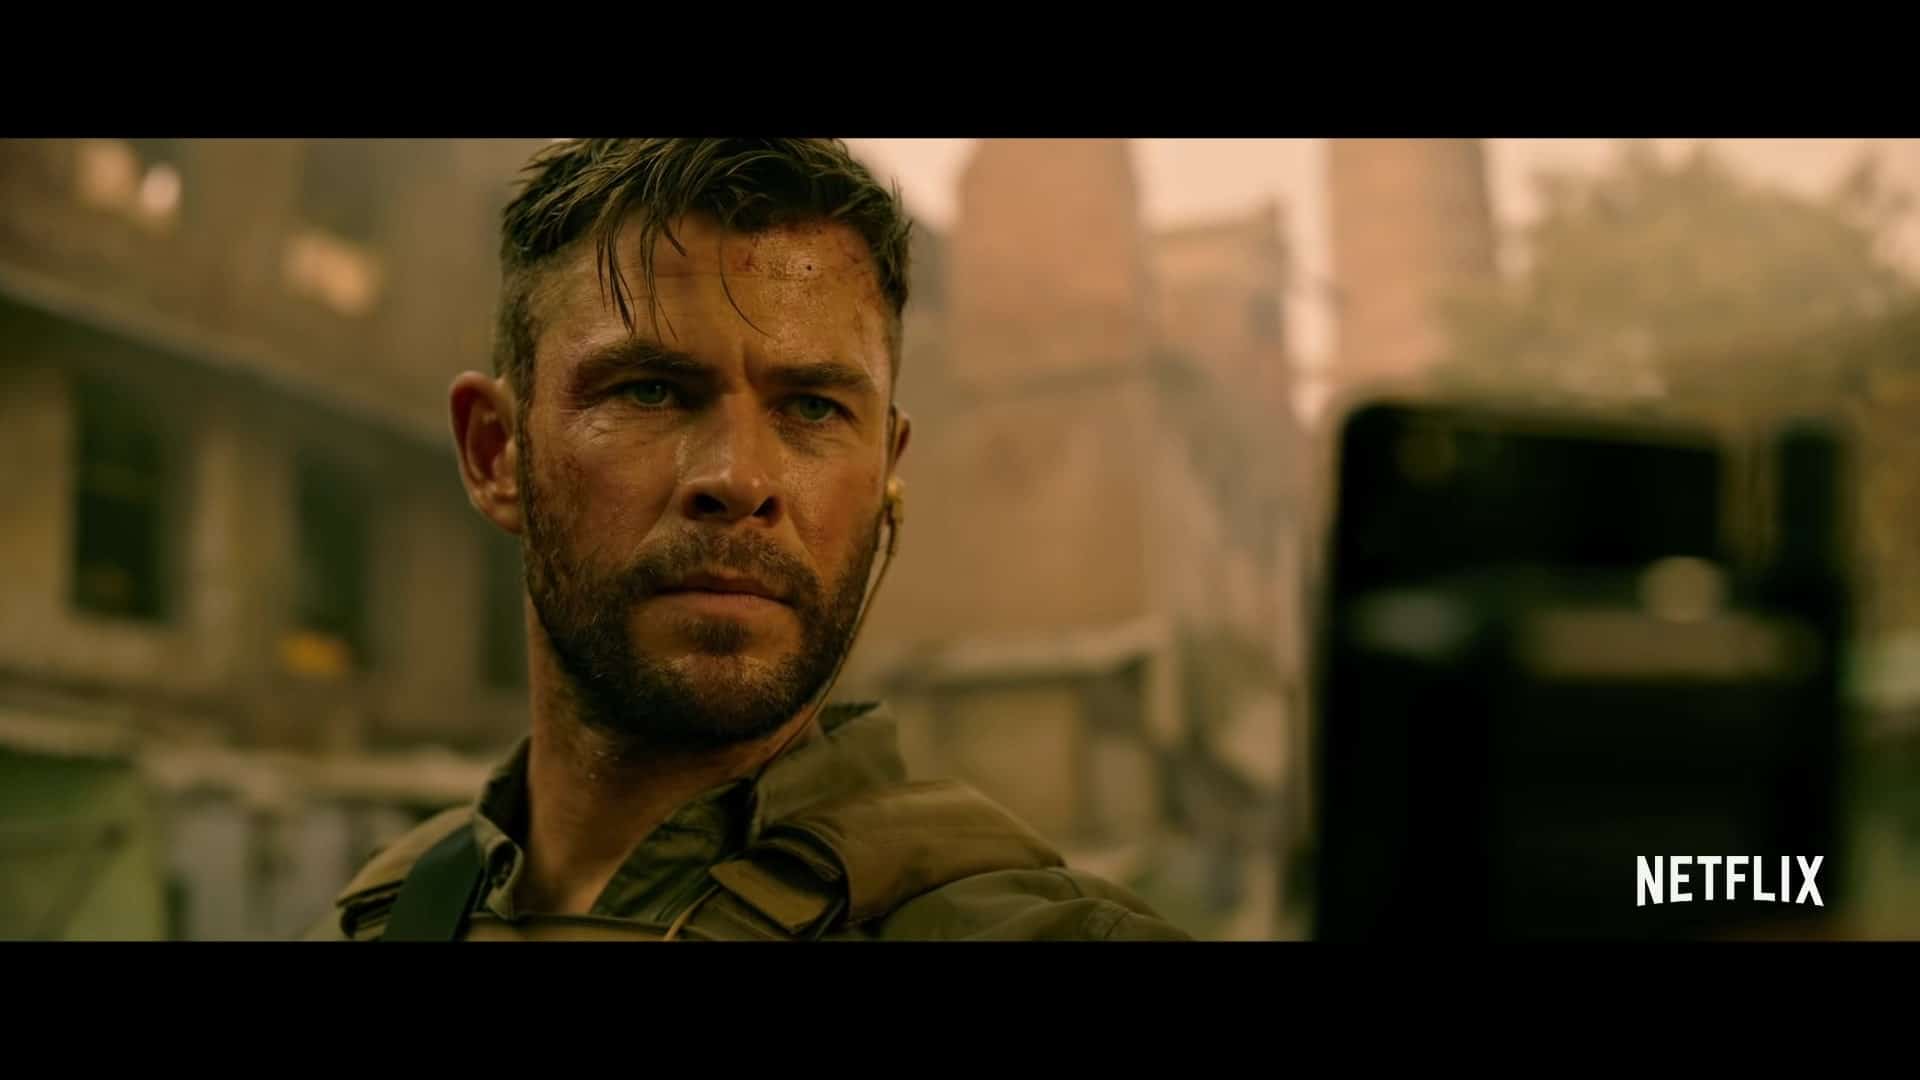 Extraction Coming to Netflix April 2020